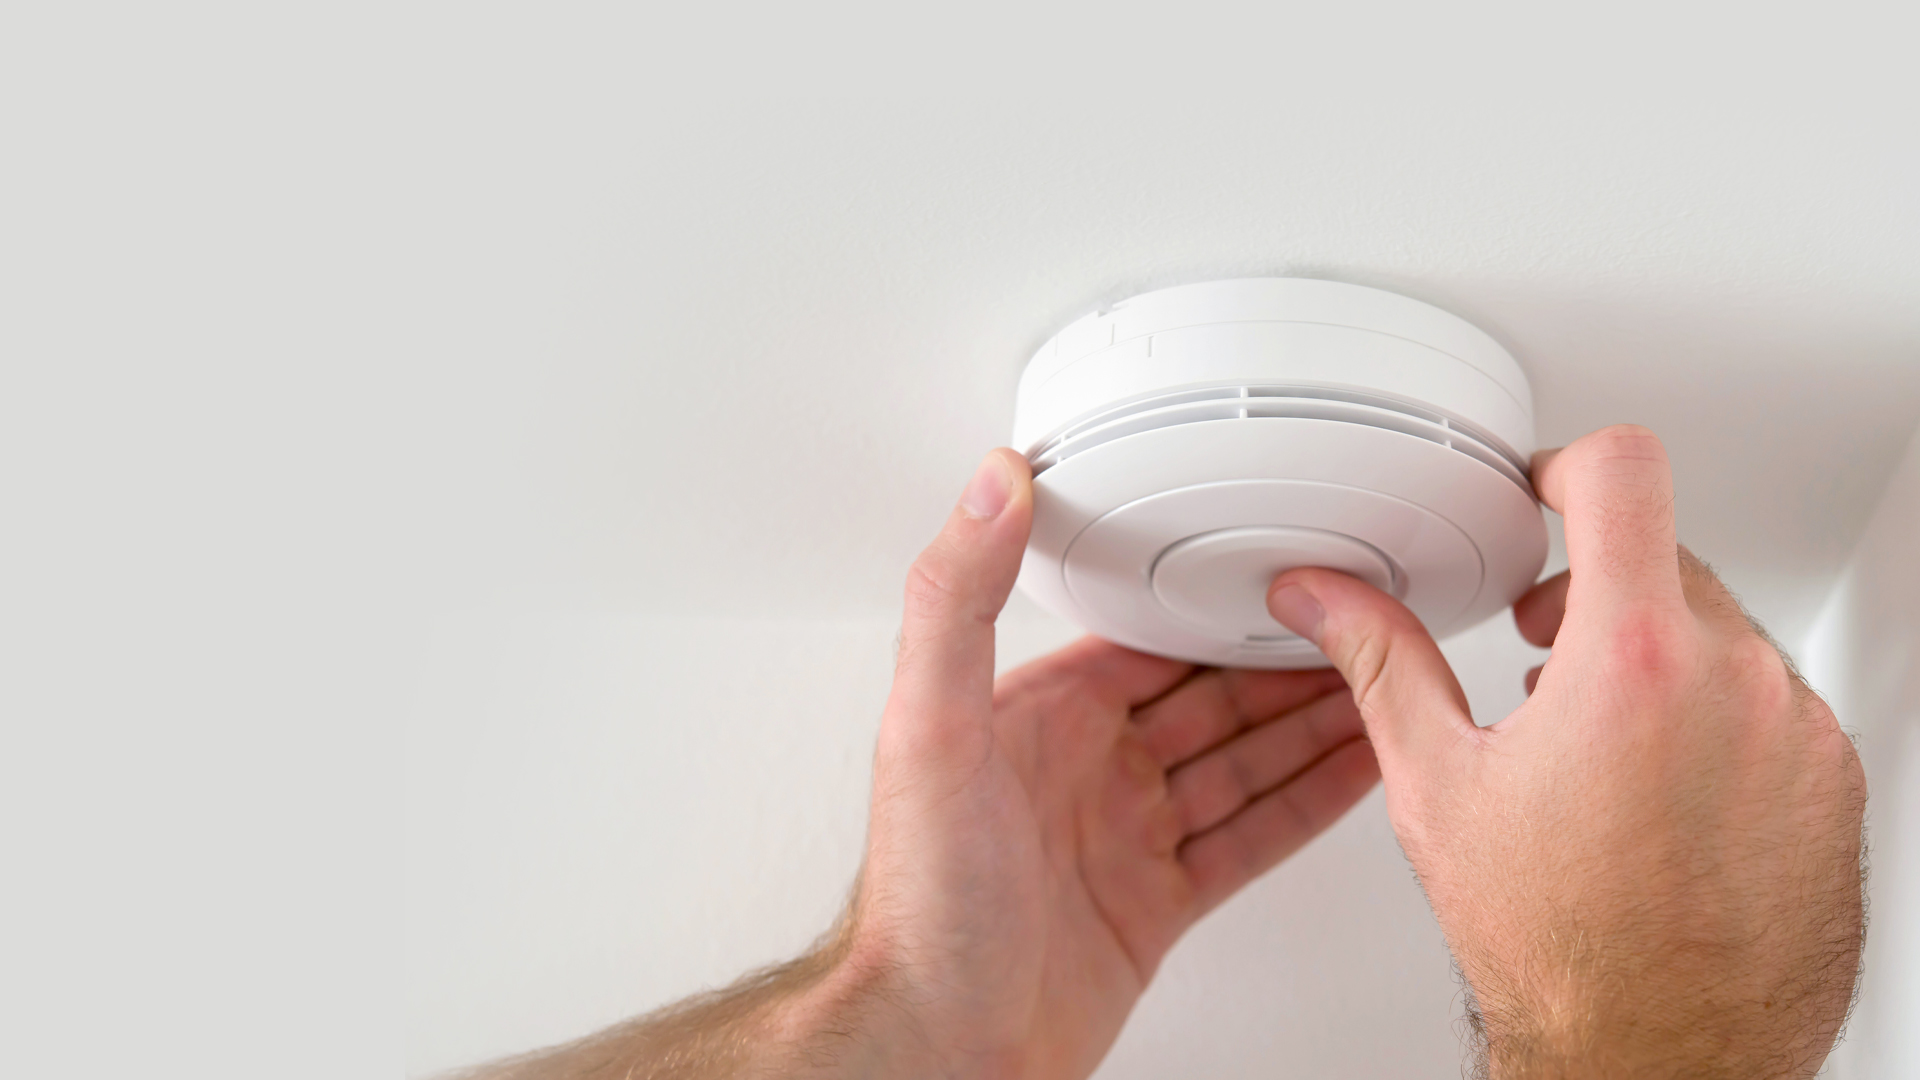 HWFRS: Working smoke alarms on every level of your home are a must